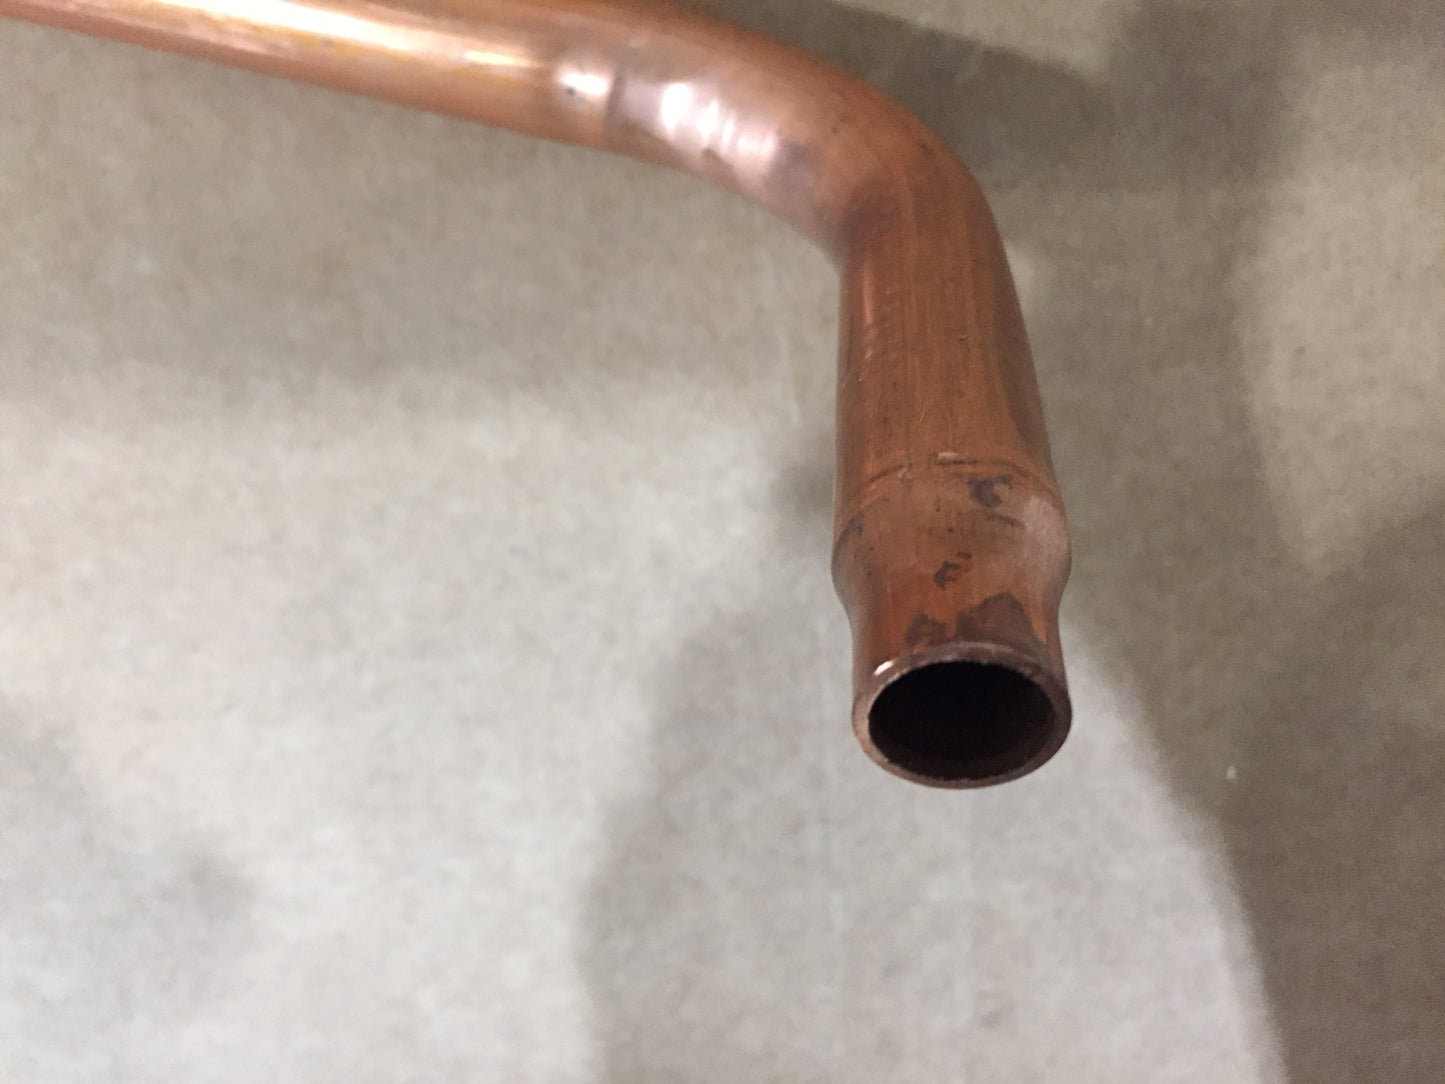 1/2 " DISCHARGE TUBE ASSEMBLY, INCLUDES HPCO